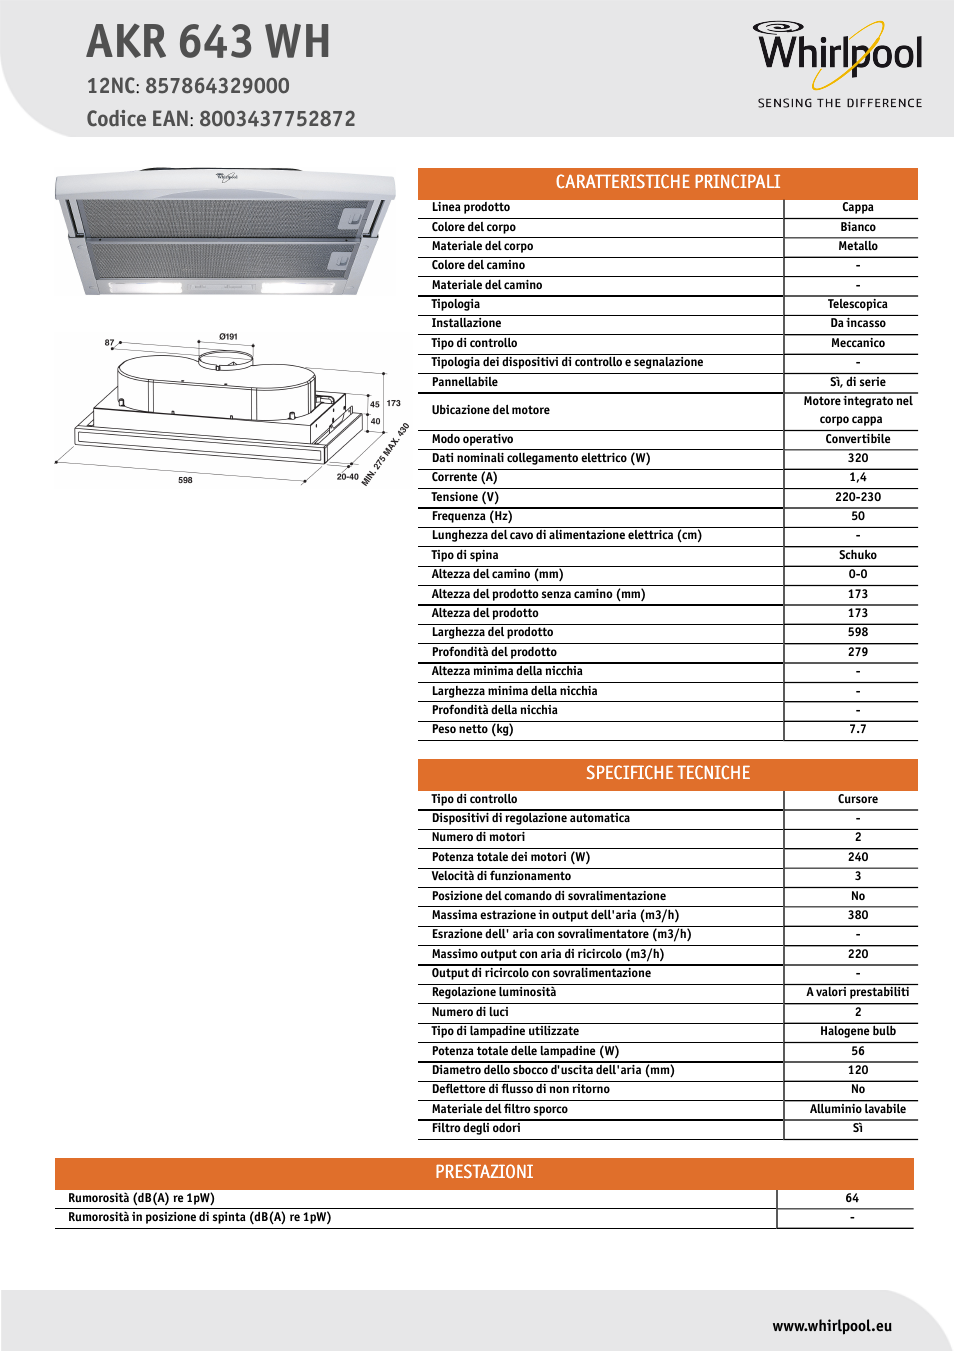 Whirlpool AKR 643 WH Manuale d'uso | Pagine: 1